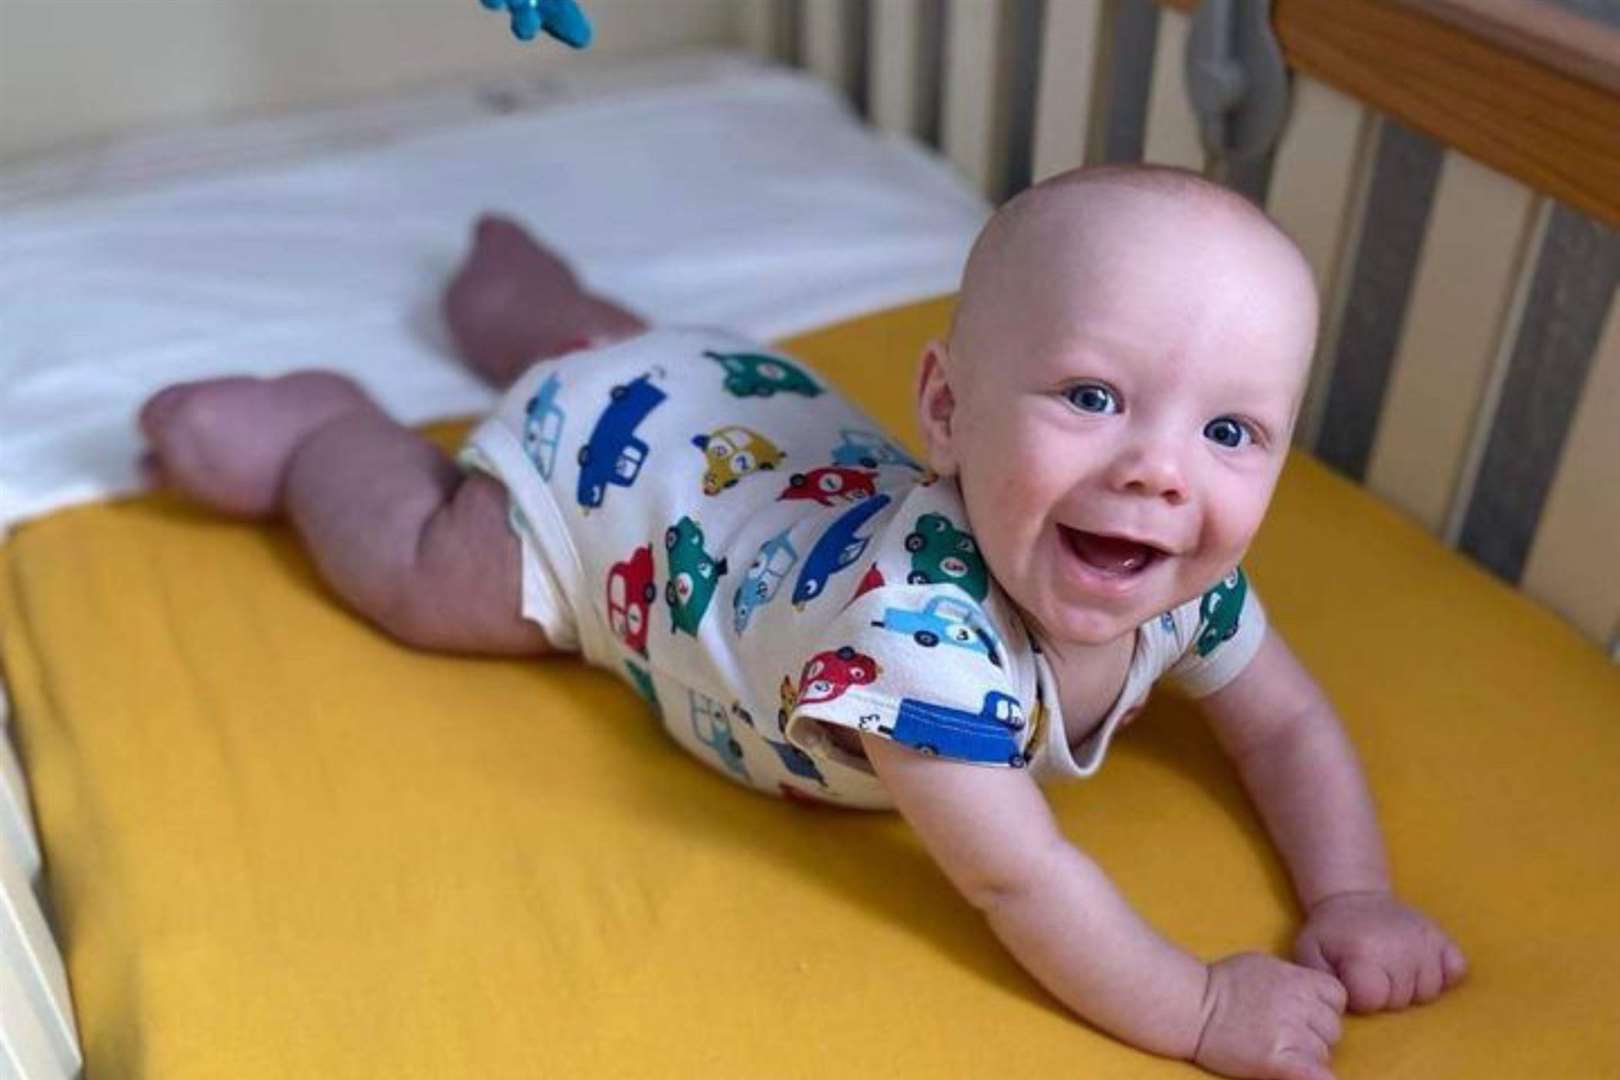 Brodie's mum says the tot is “smiley and thriving” against the odds. Picture: SWNS